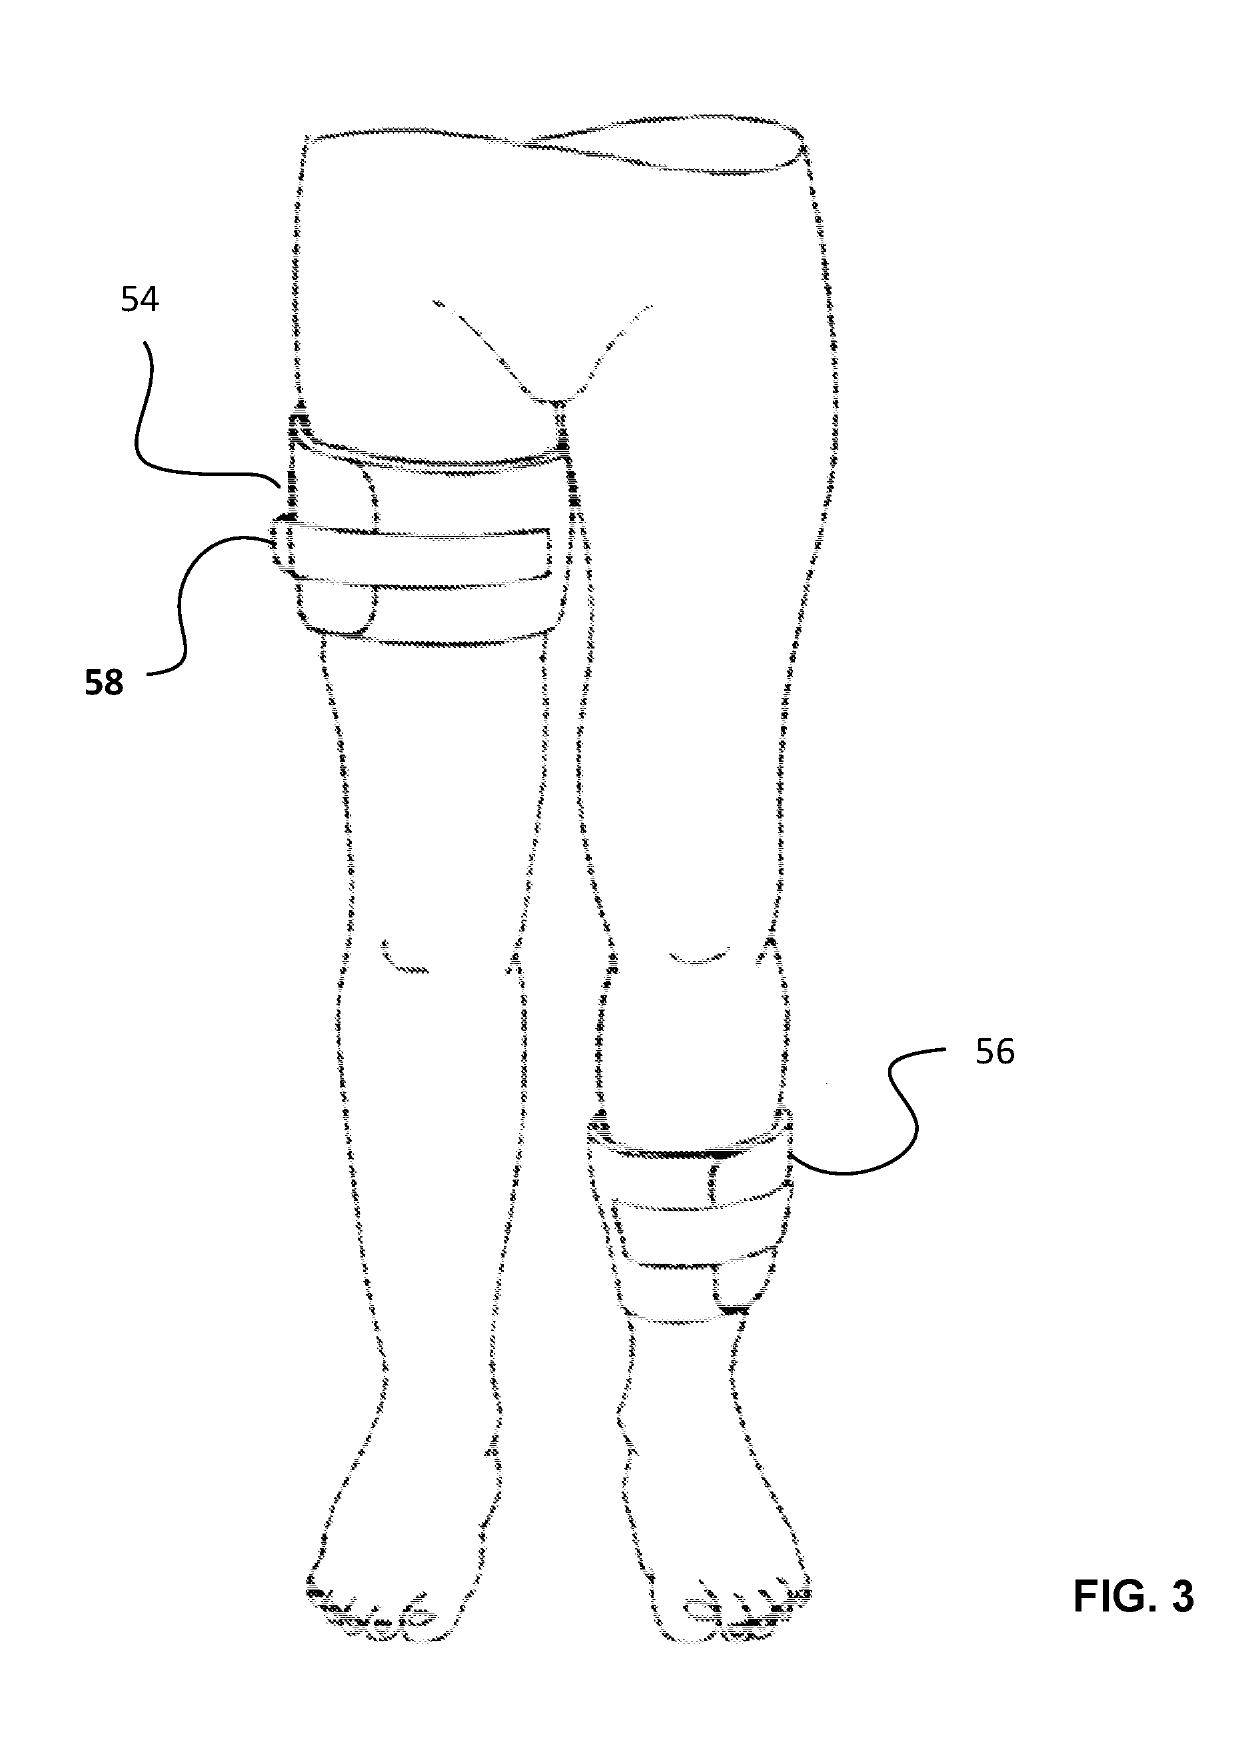 Medical cuff employing electrical stimulation to control blood flow